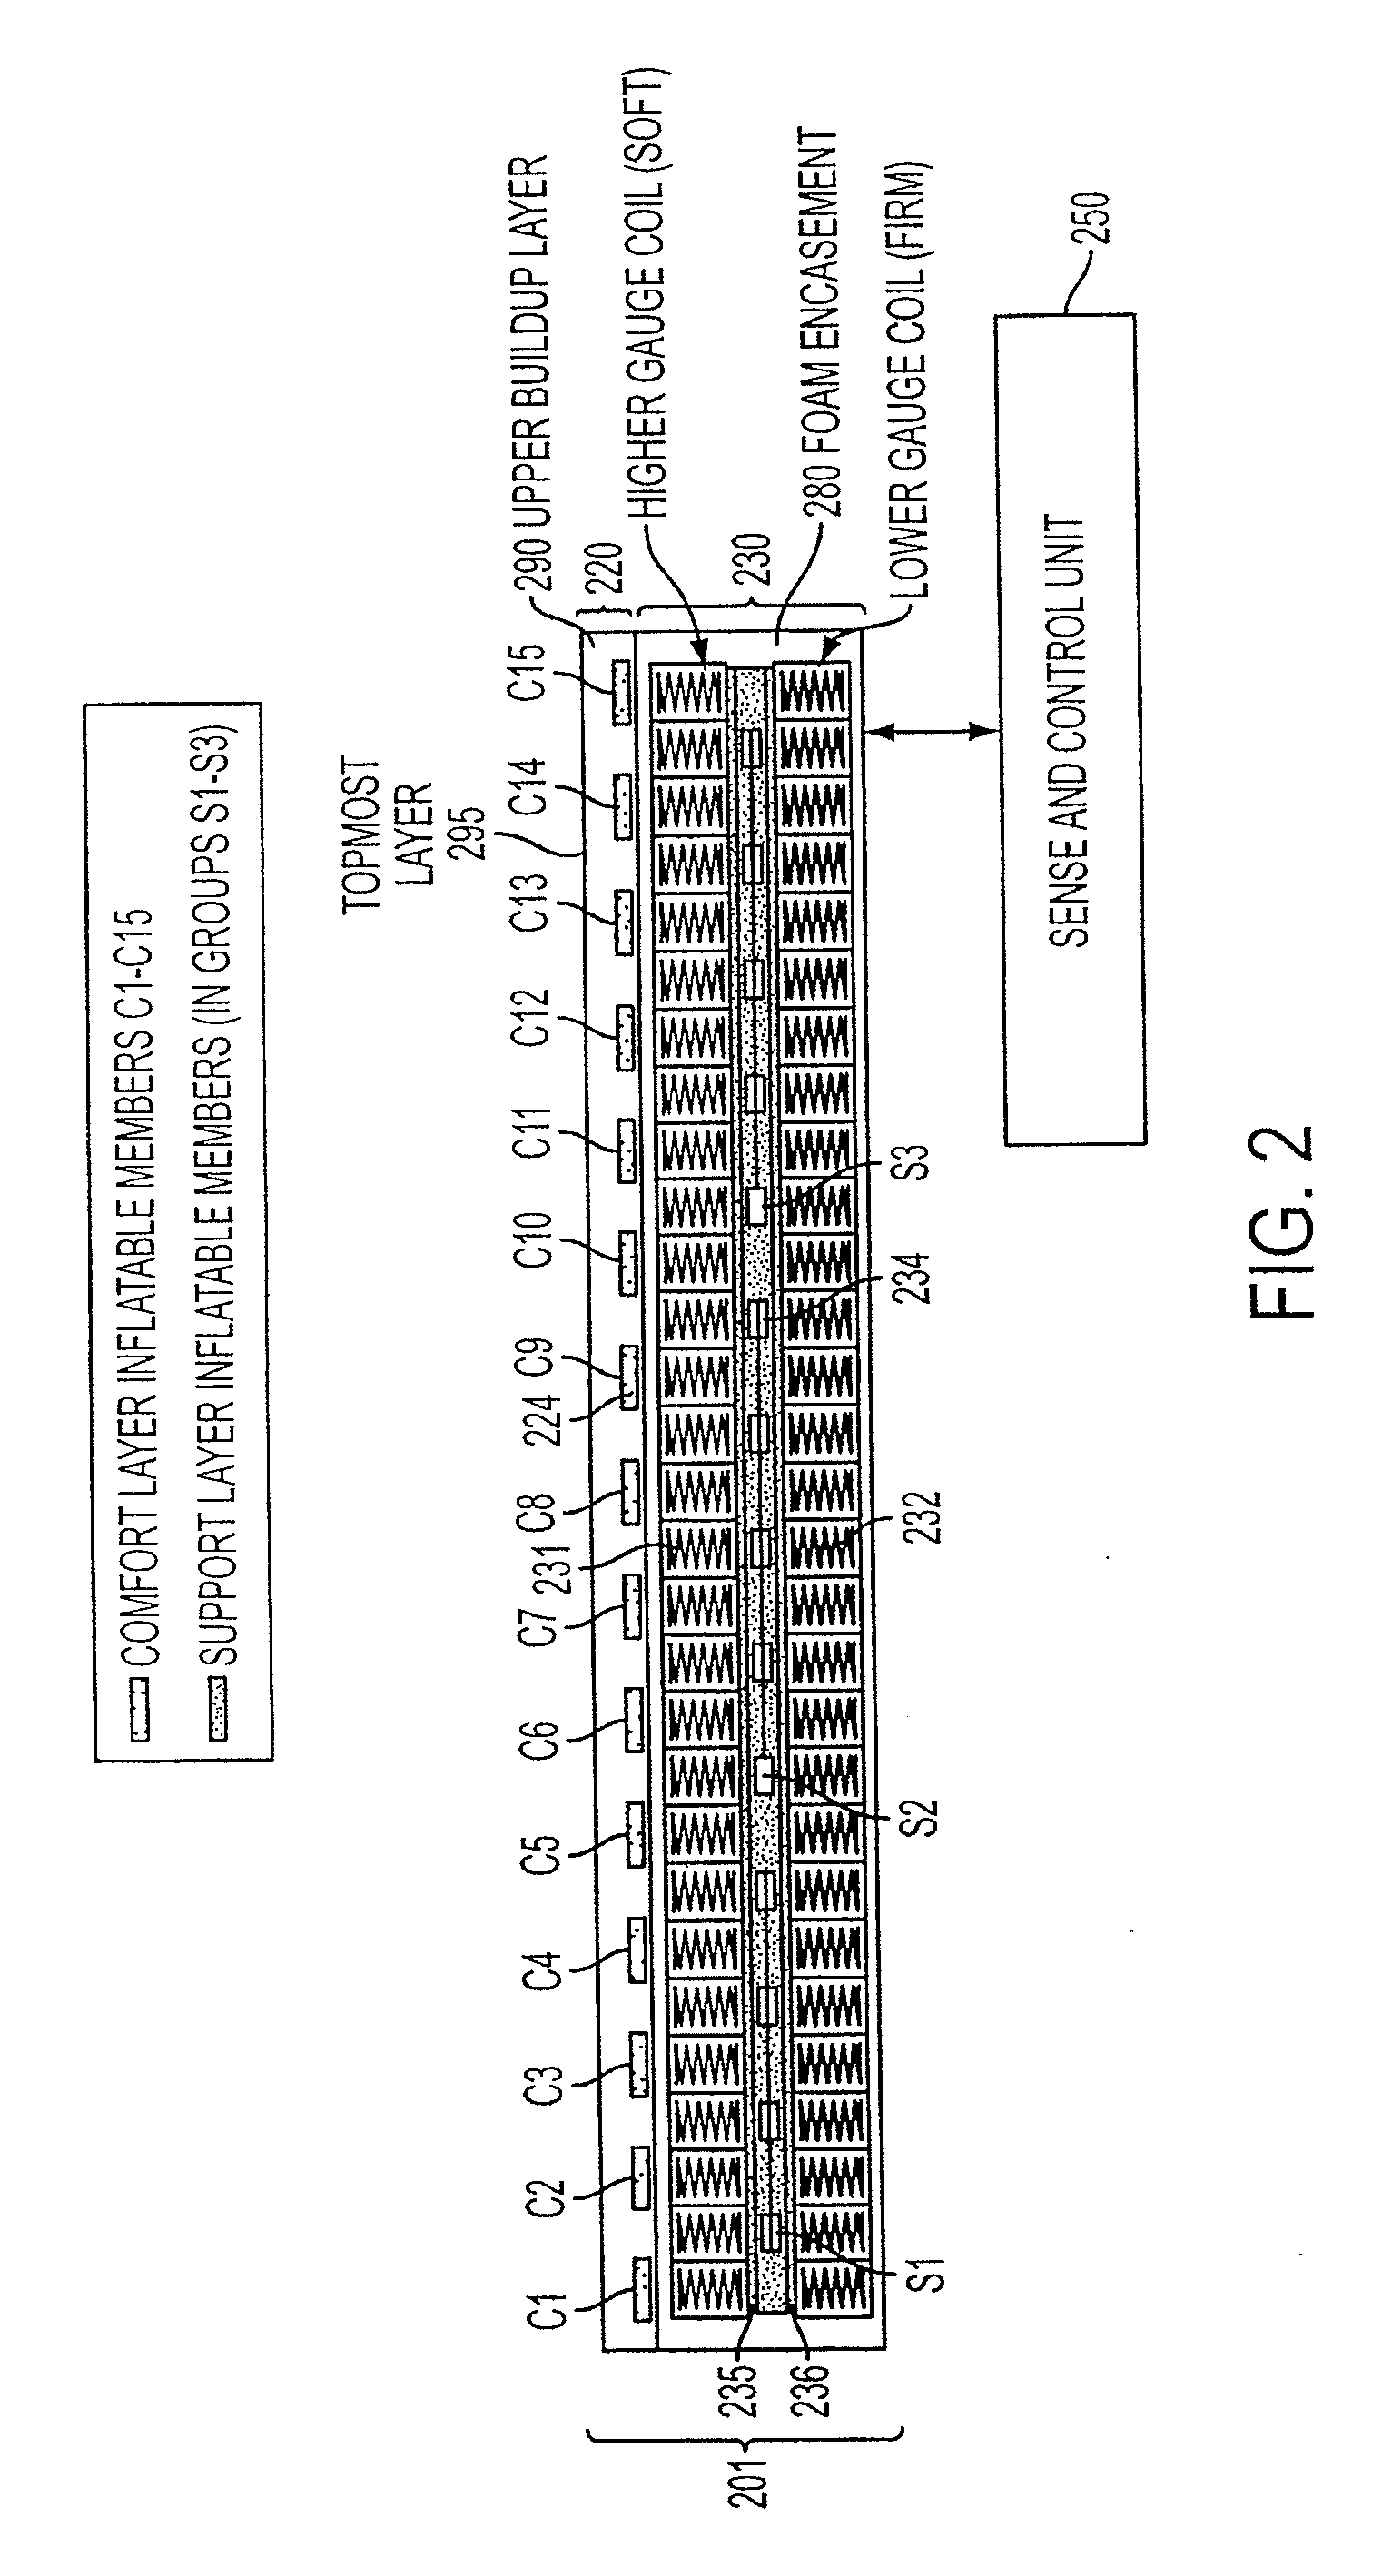 Apparatuses and methods providing variable support and variable comfort control of a sleep system and automatic adjustment thereof